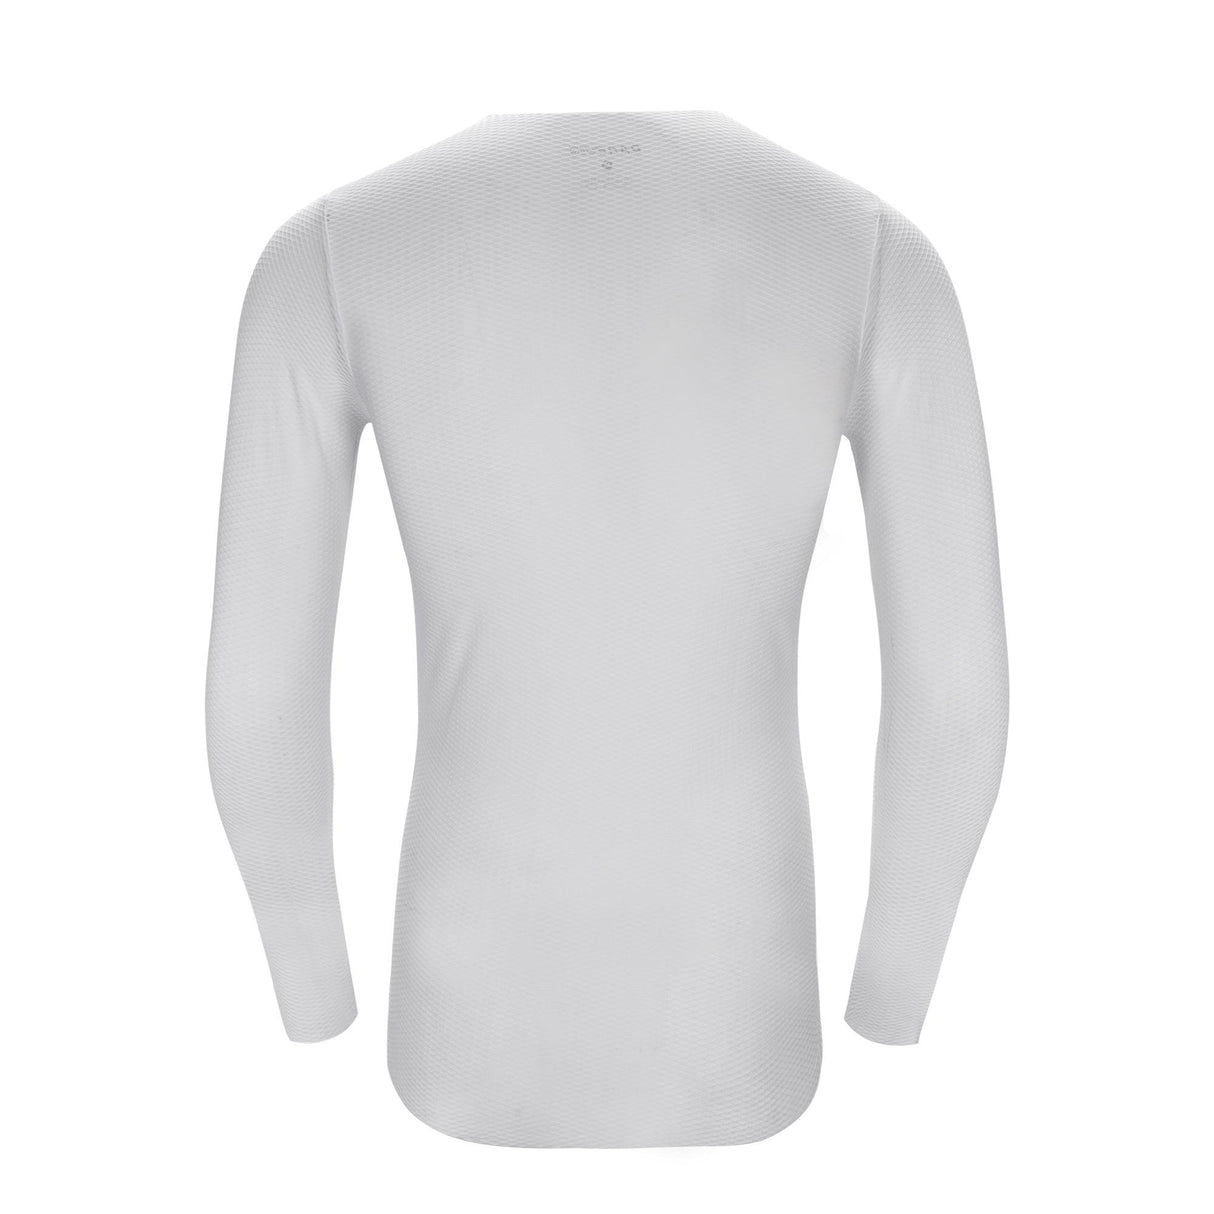 SEAMLESS LS CYCLING BASE LAYER -WIHTE-BACK- Darevie Shop